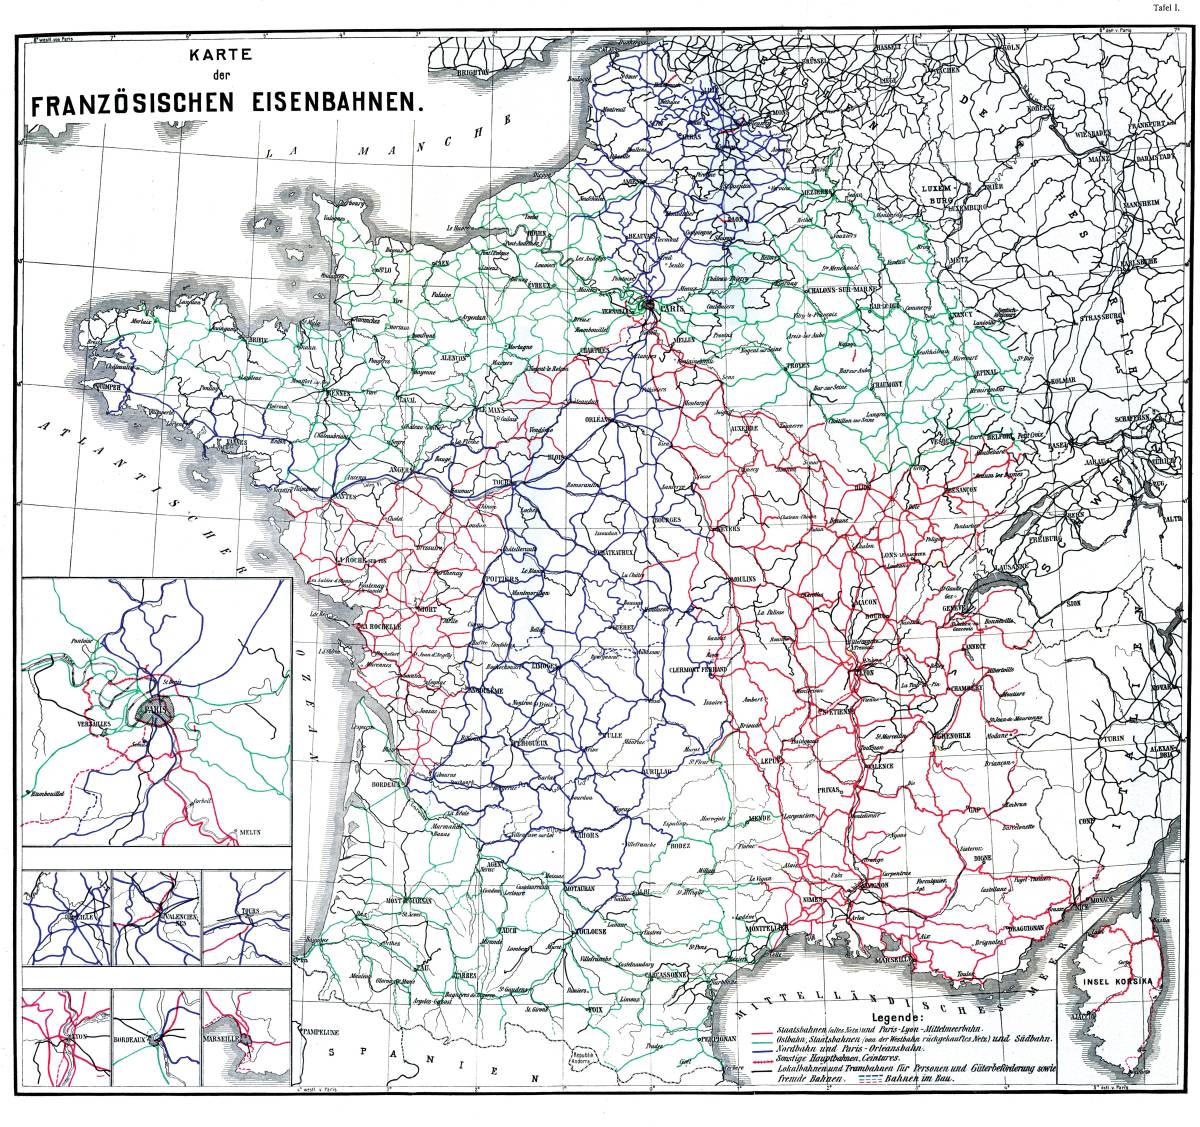 French rail lines and their respective companies in 1912